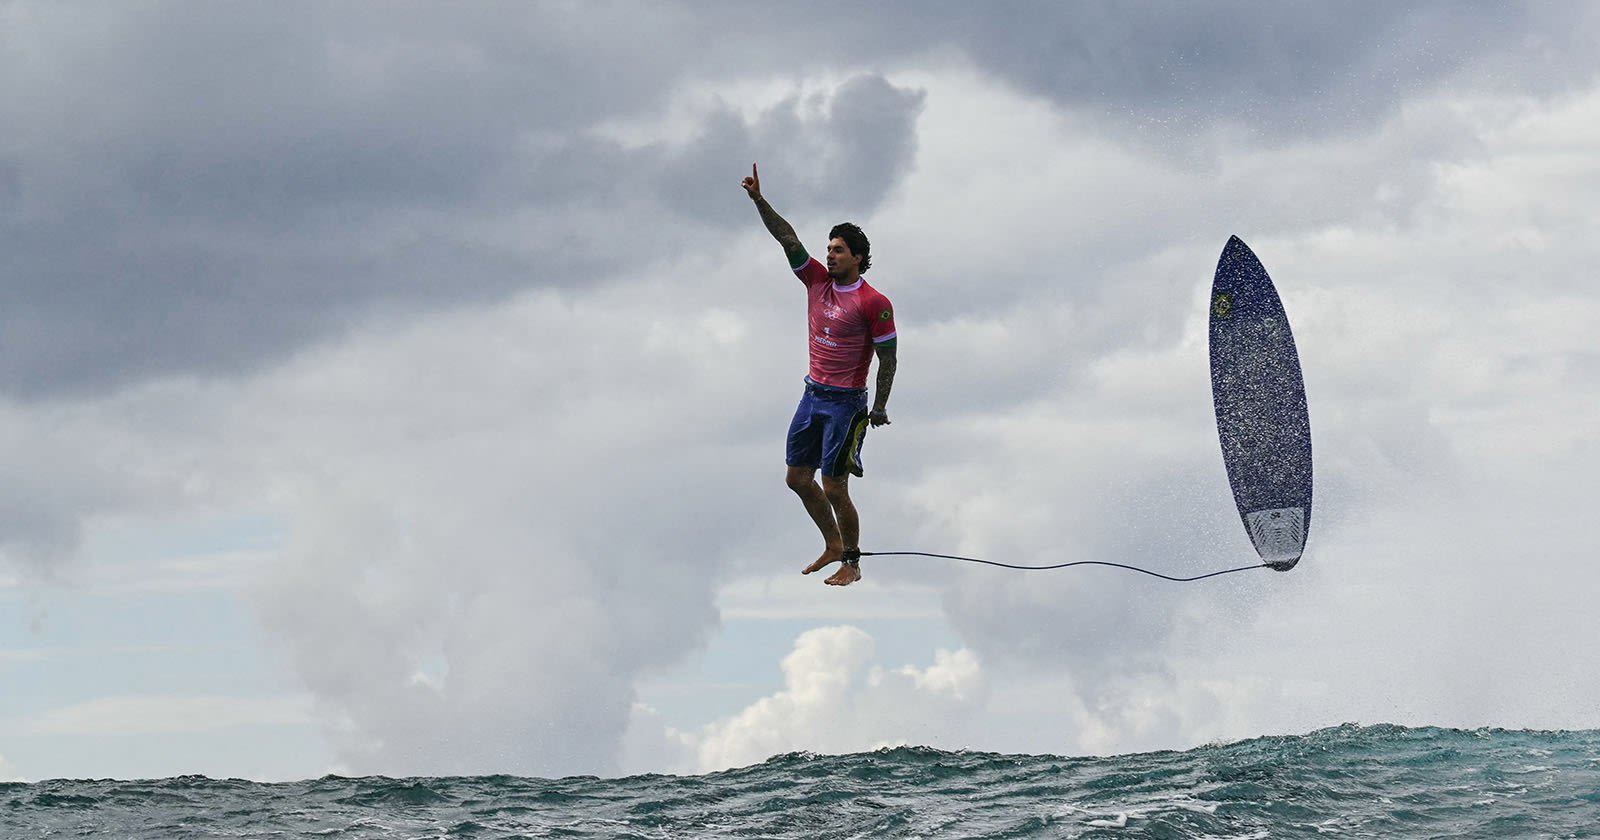 Unbelievable Photo of Olympic Surfer's 'Floating' Celebration Goes Viral